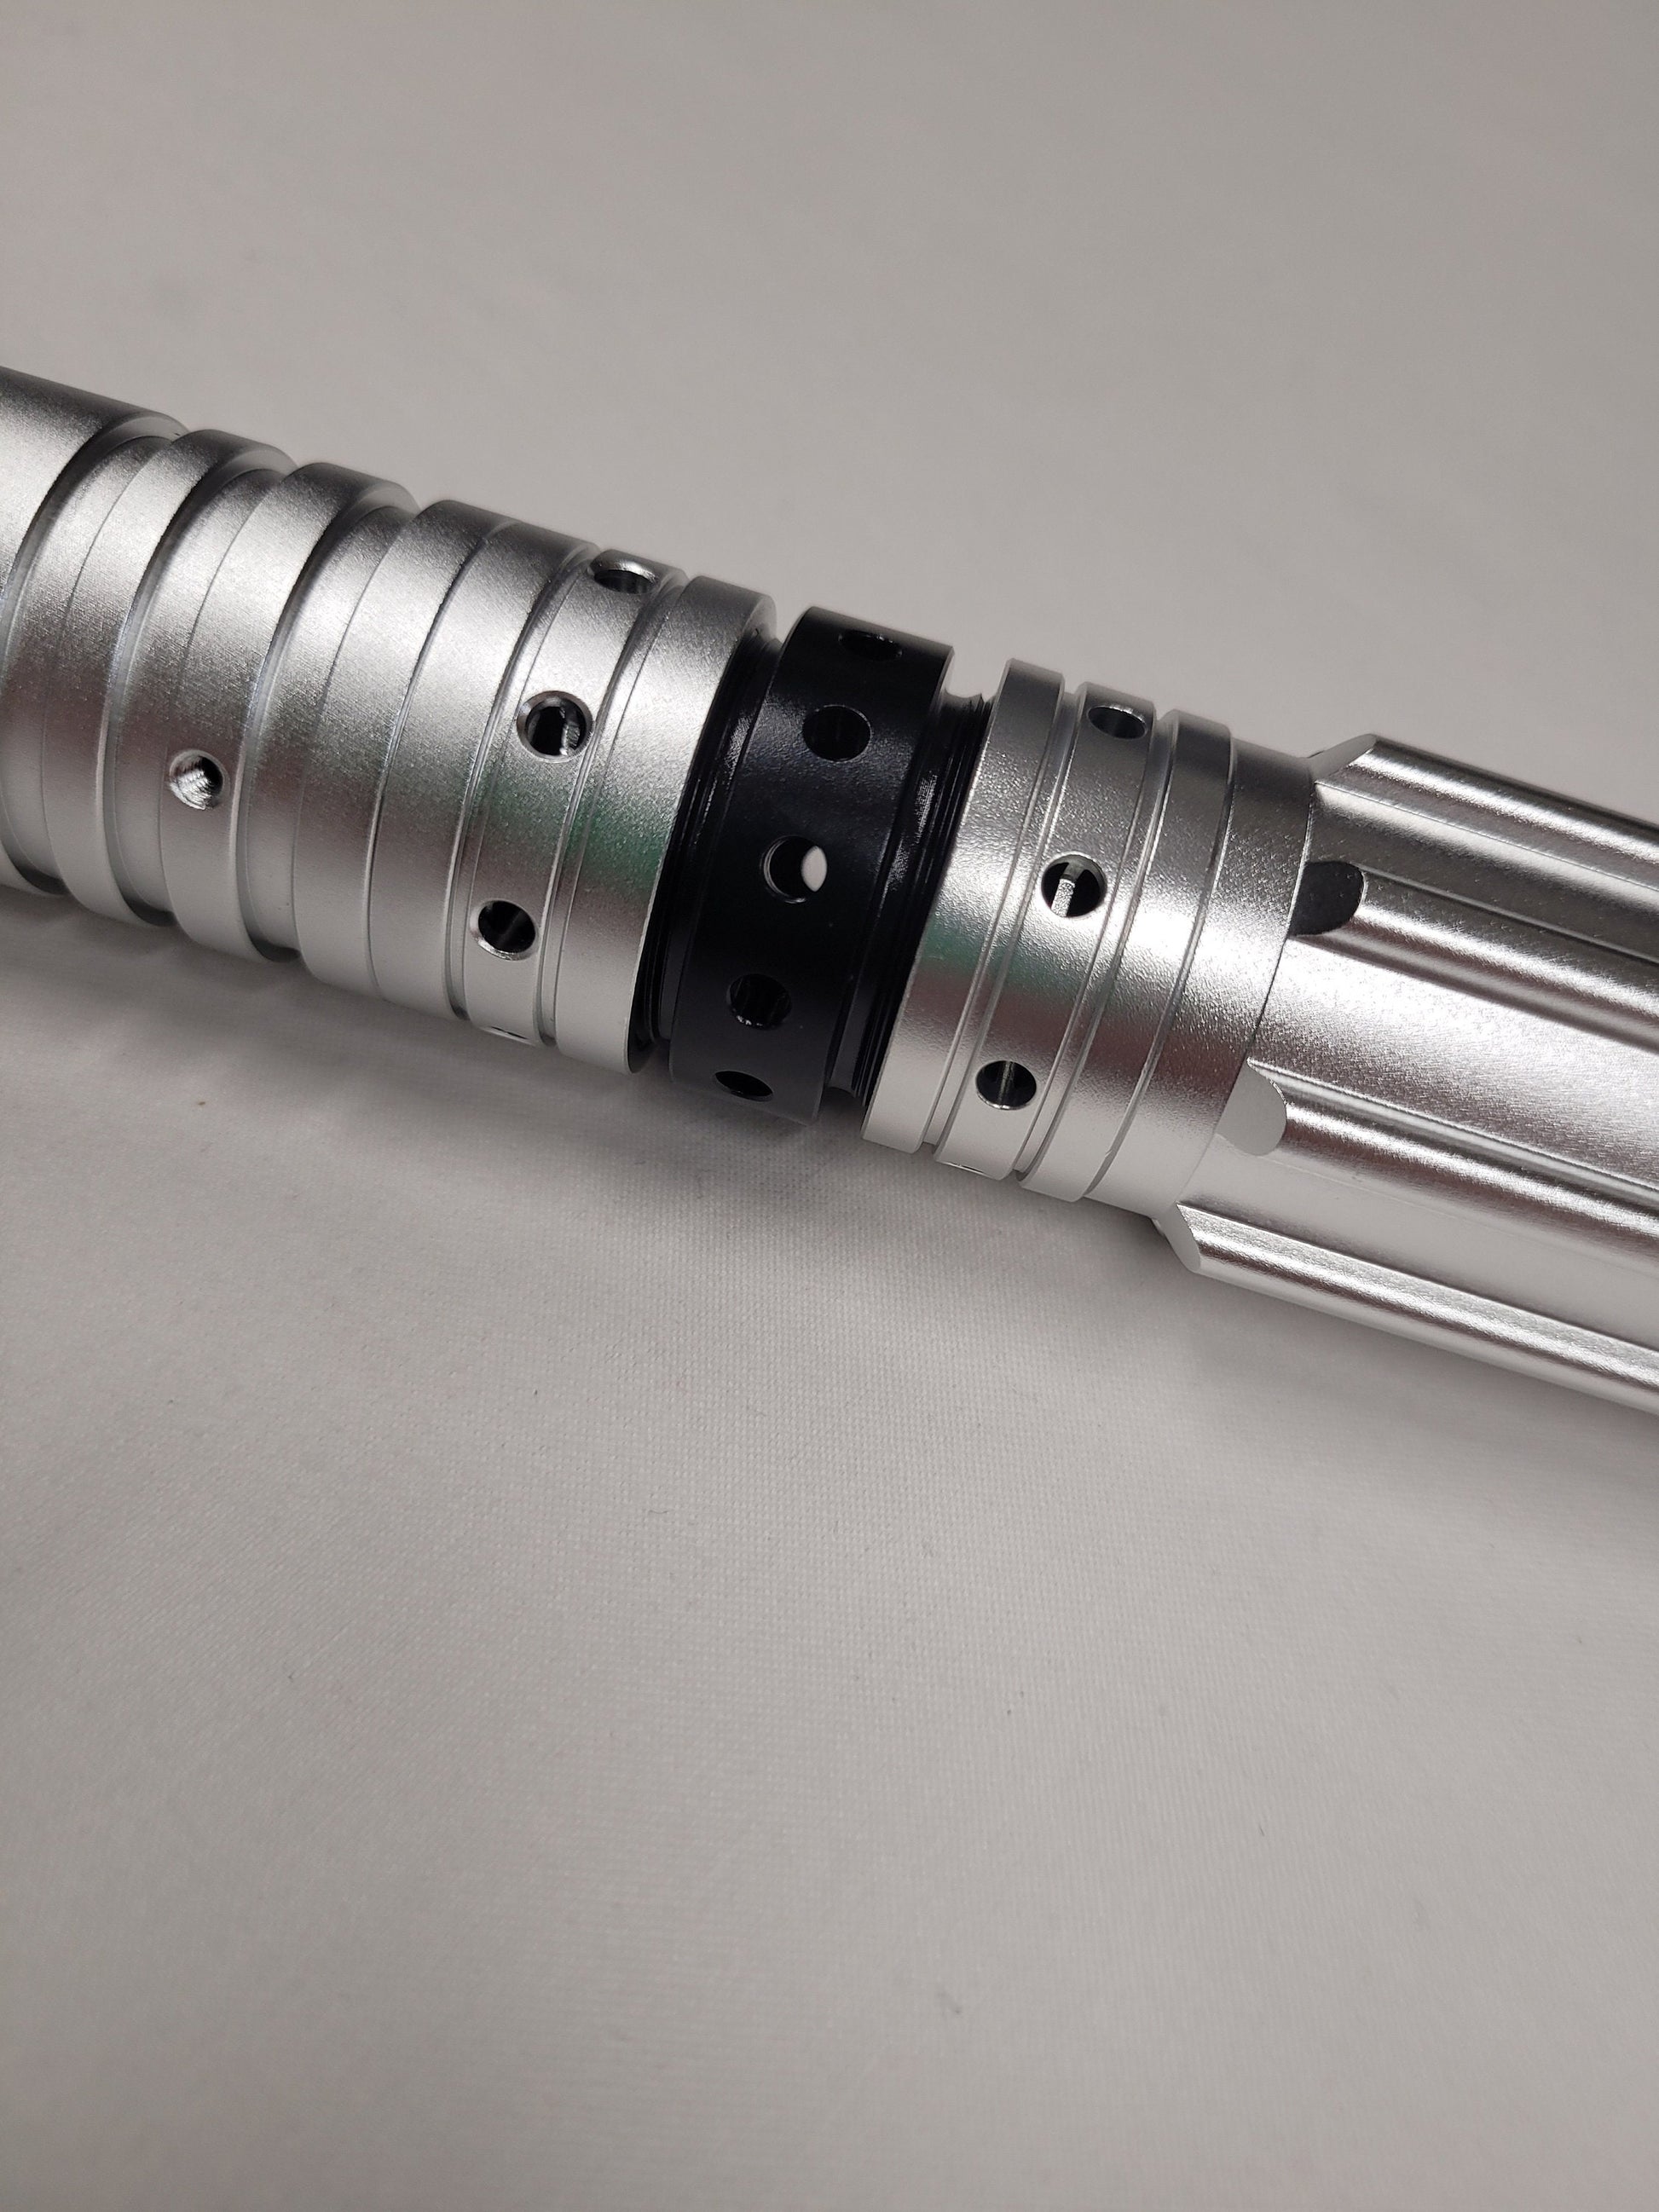 Lightsaber Coupling Adapter Sound Coupling Adapter Double Saber for our lightsabers with sound Extremely Durable Star Wars Bossaber